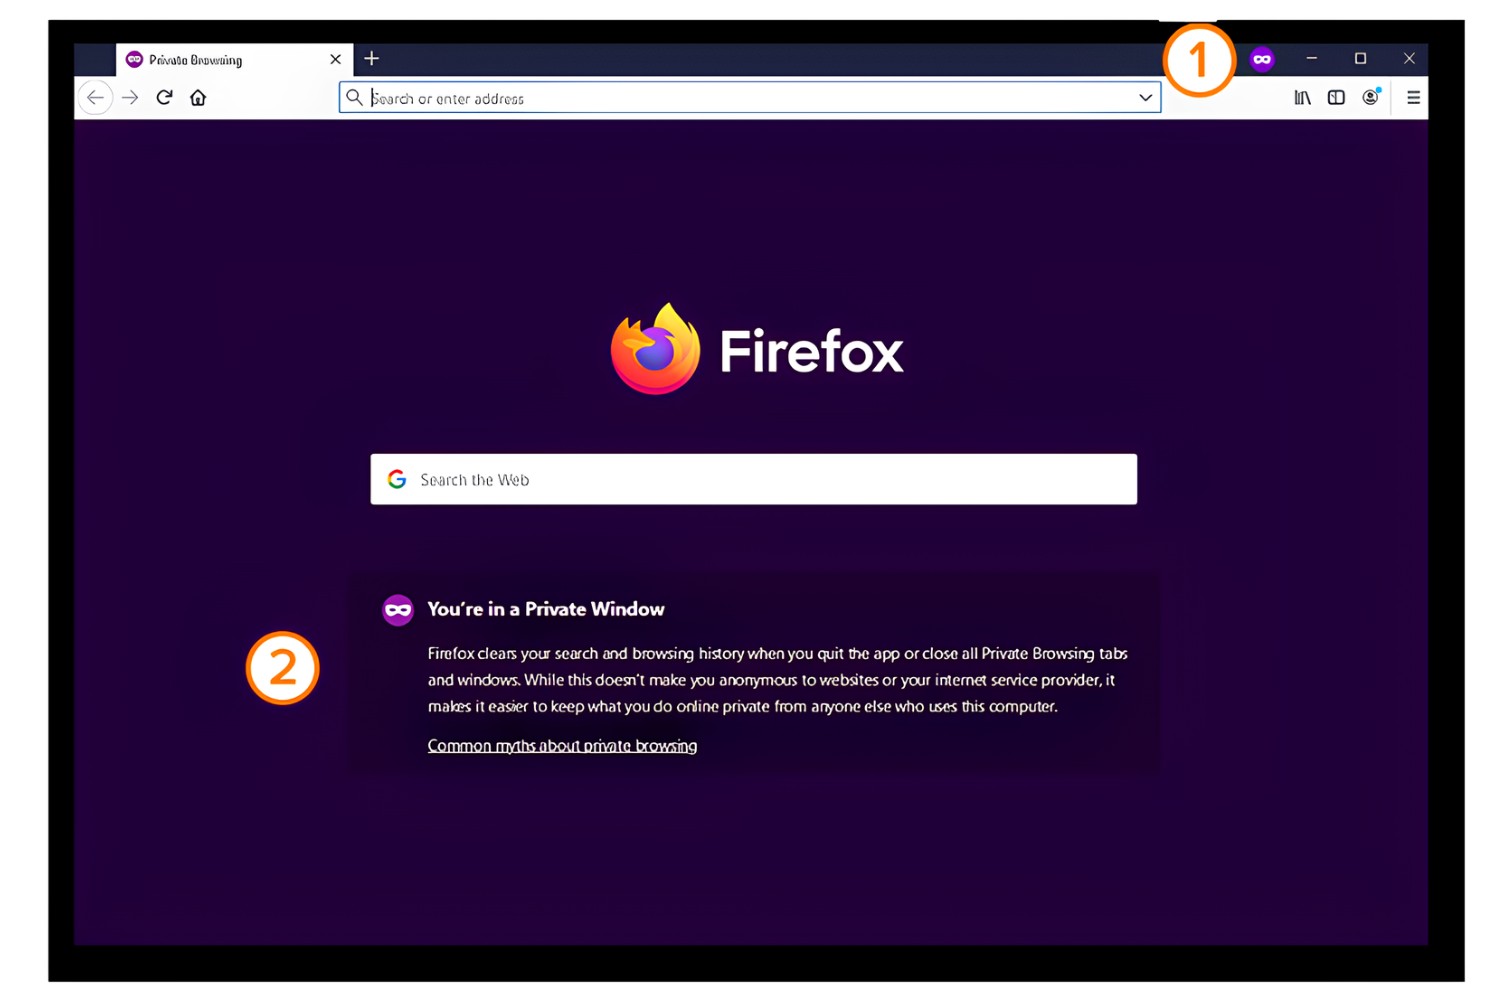 How Do I Turn Off Private Browsing In Firefox?